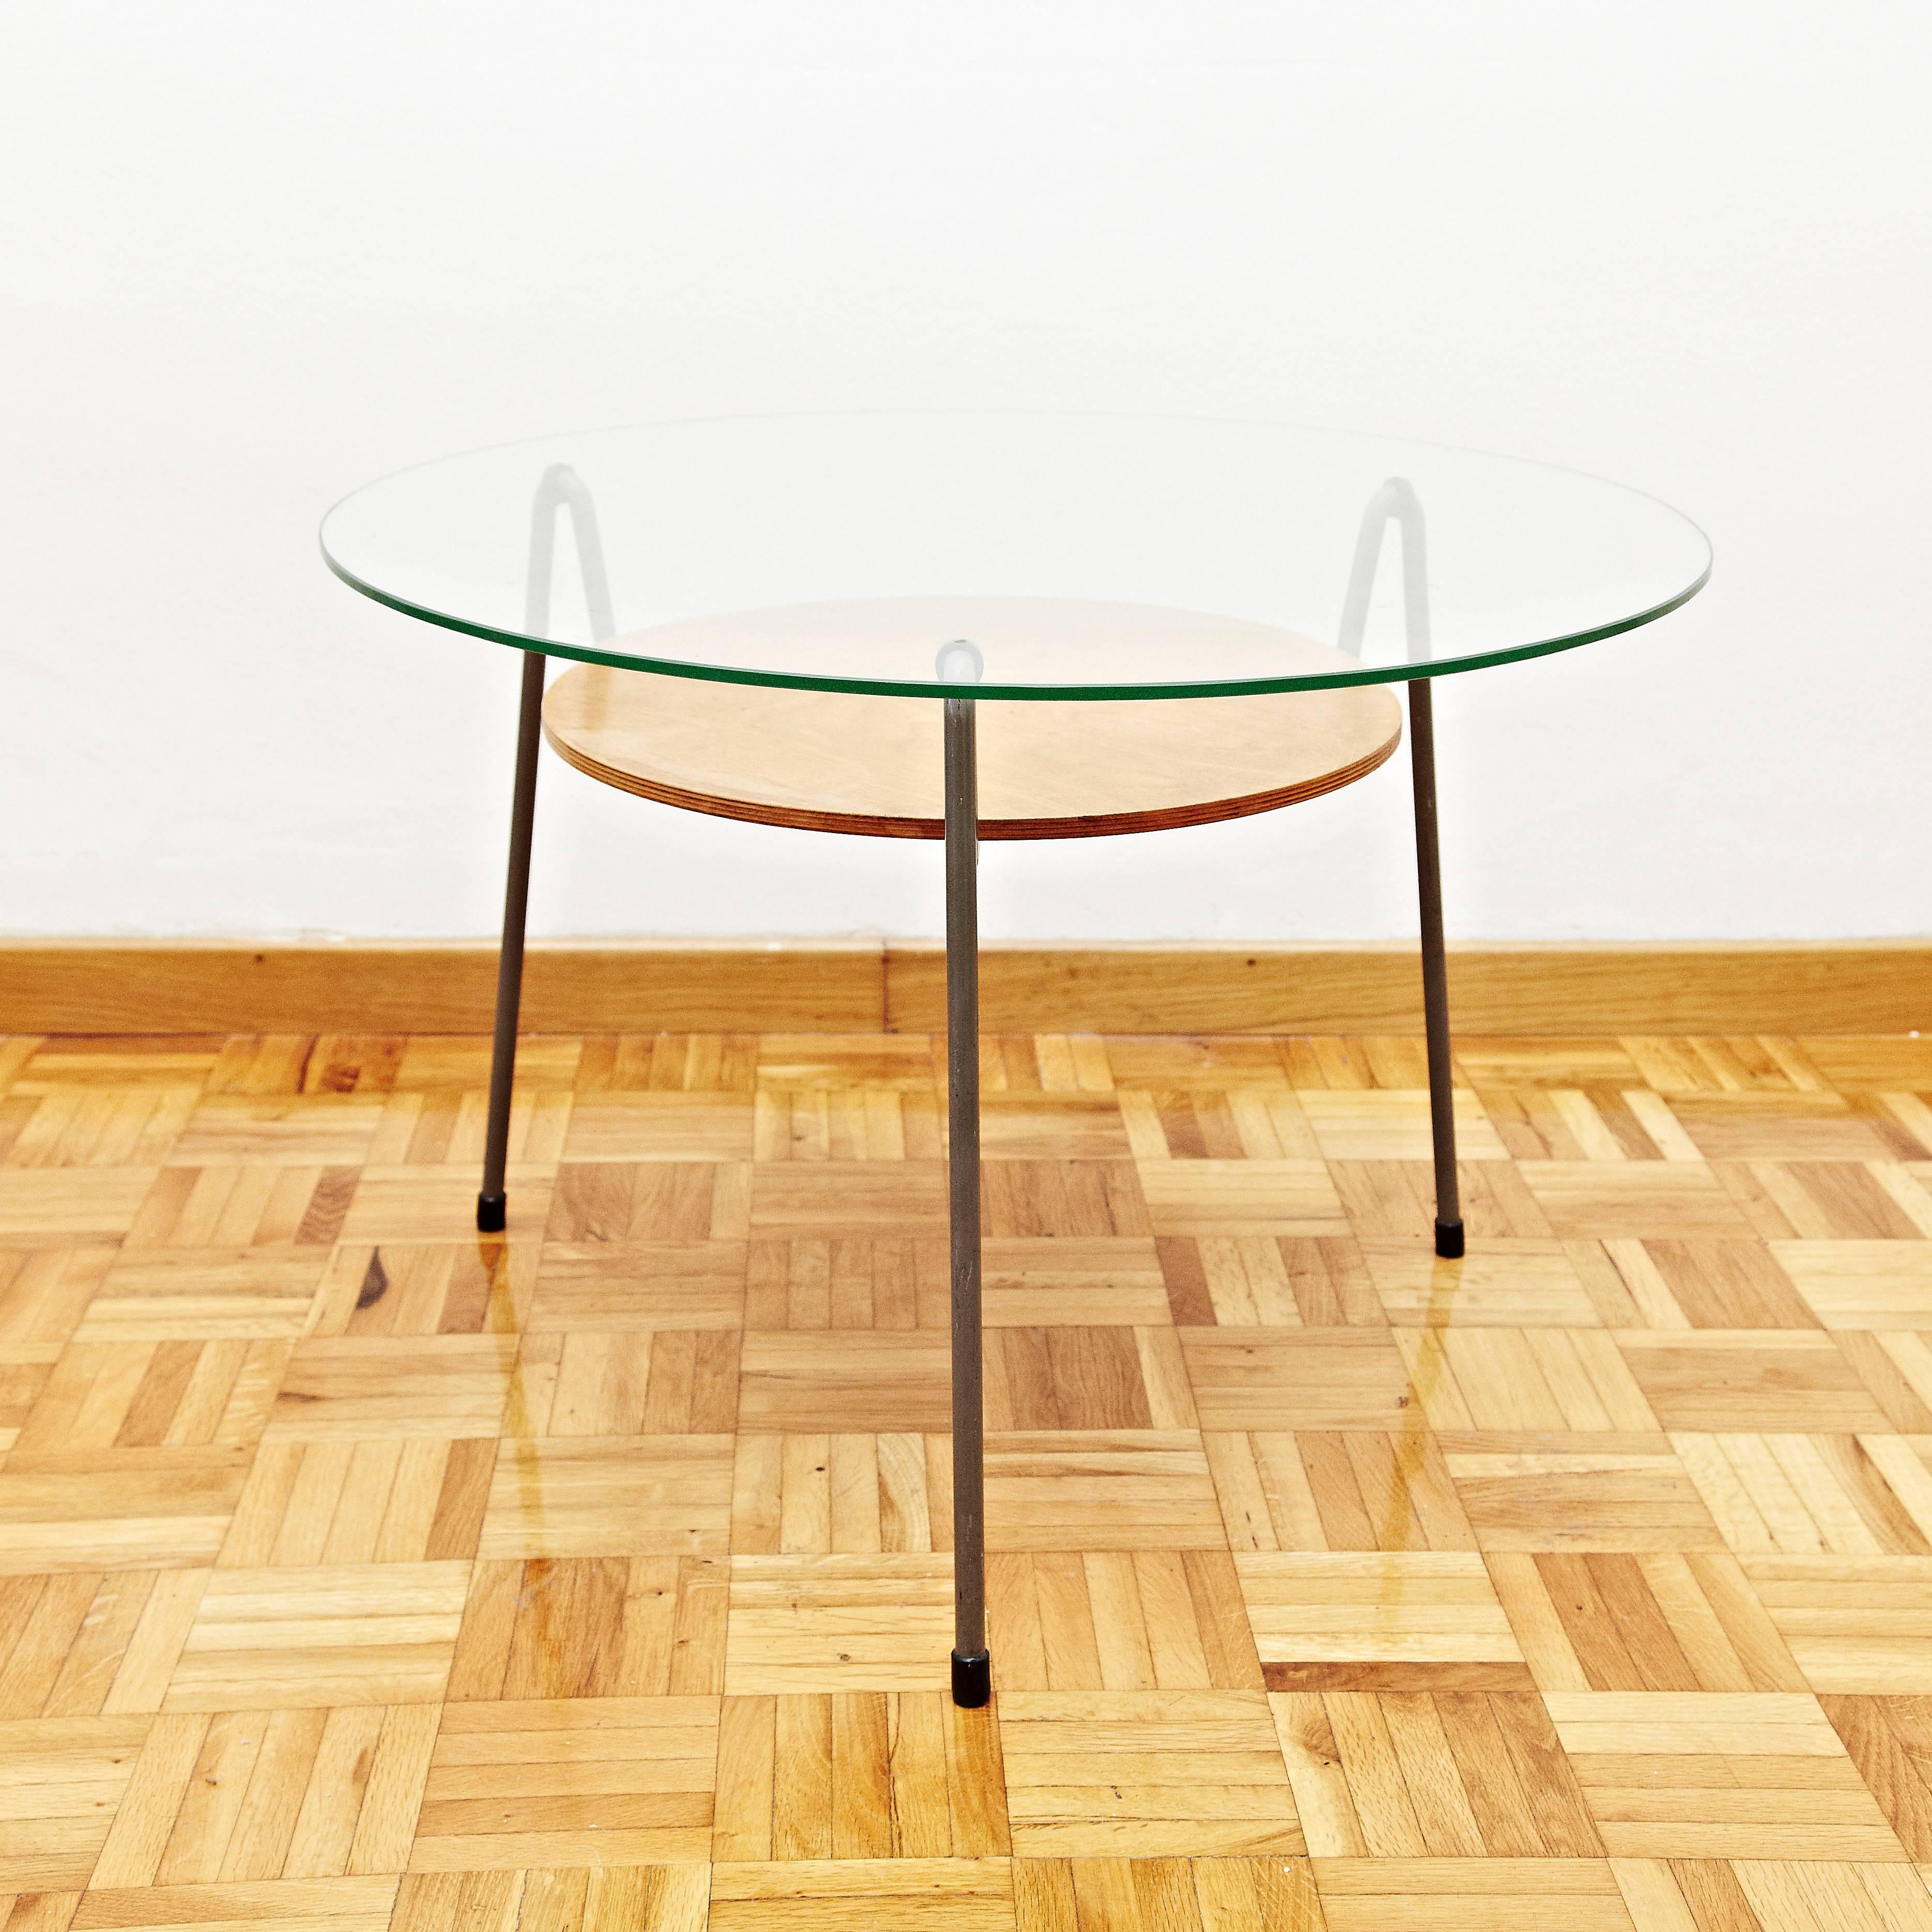 Coffee table designed by Wim Rietveld in 1959.
Manufactured in Netherlands
Lacquered metal frame, crystal tabletop and wood.

In good excellent original condition, preserving a beautiful patina.

Wim Rietveld (1924-1985) the youngest son of